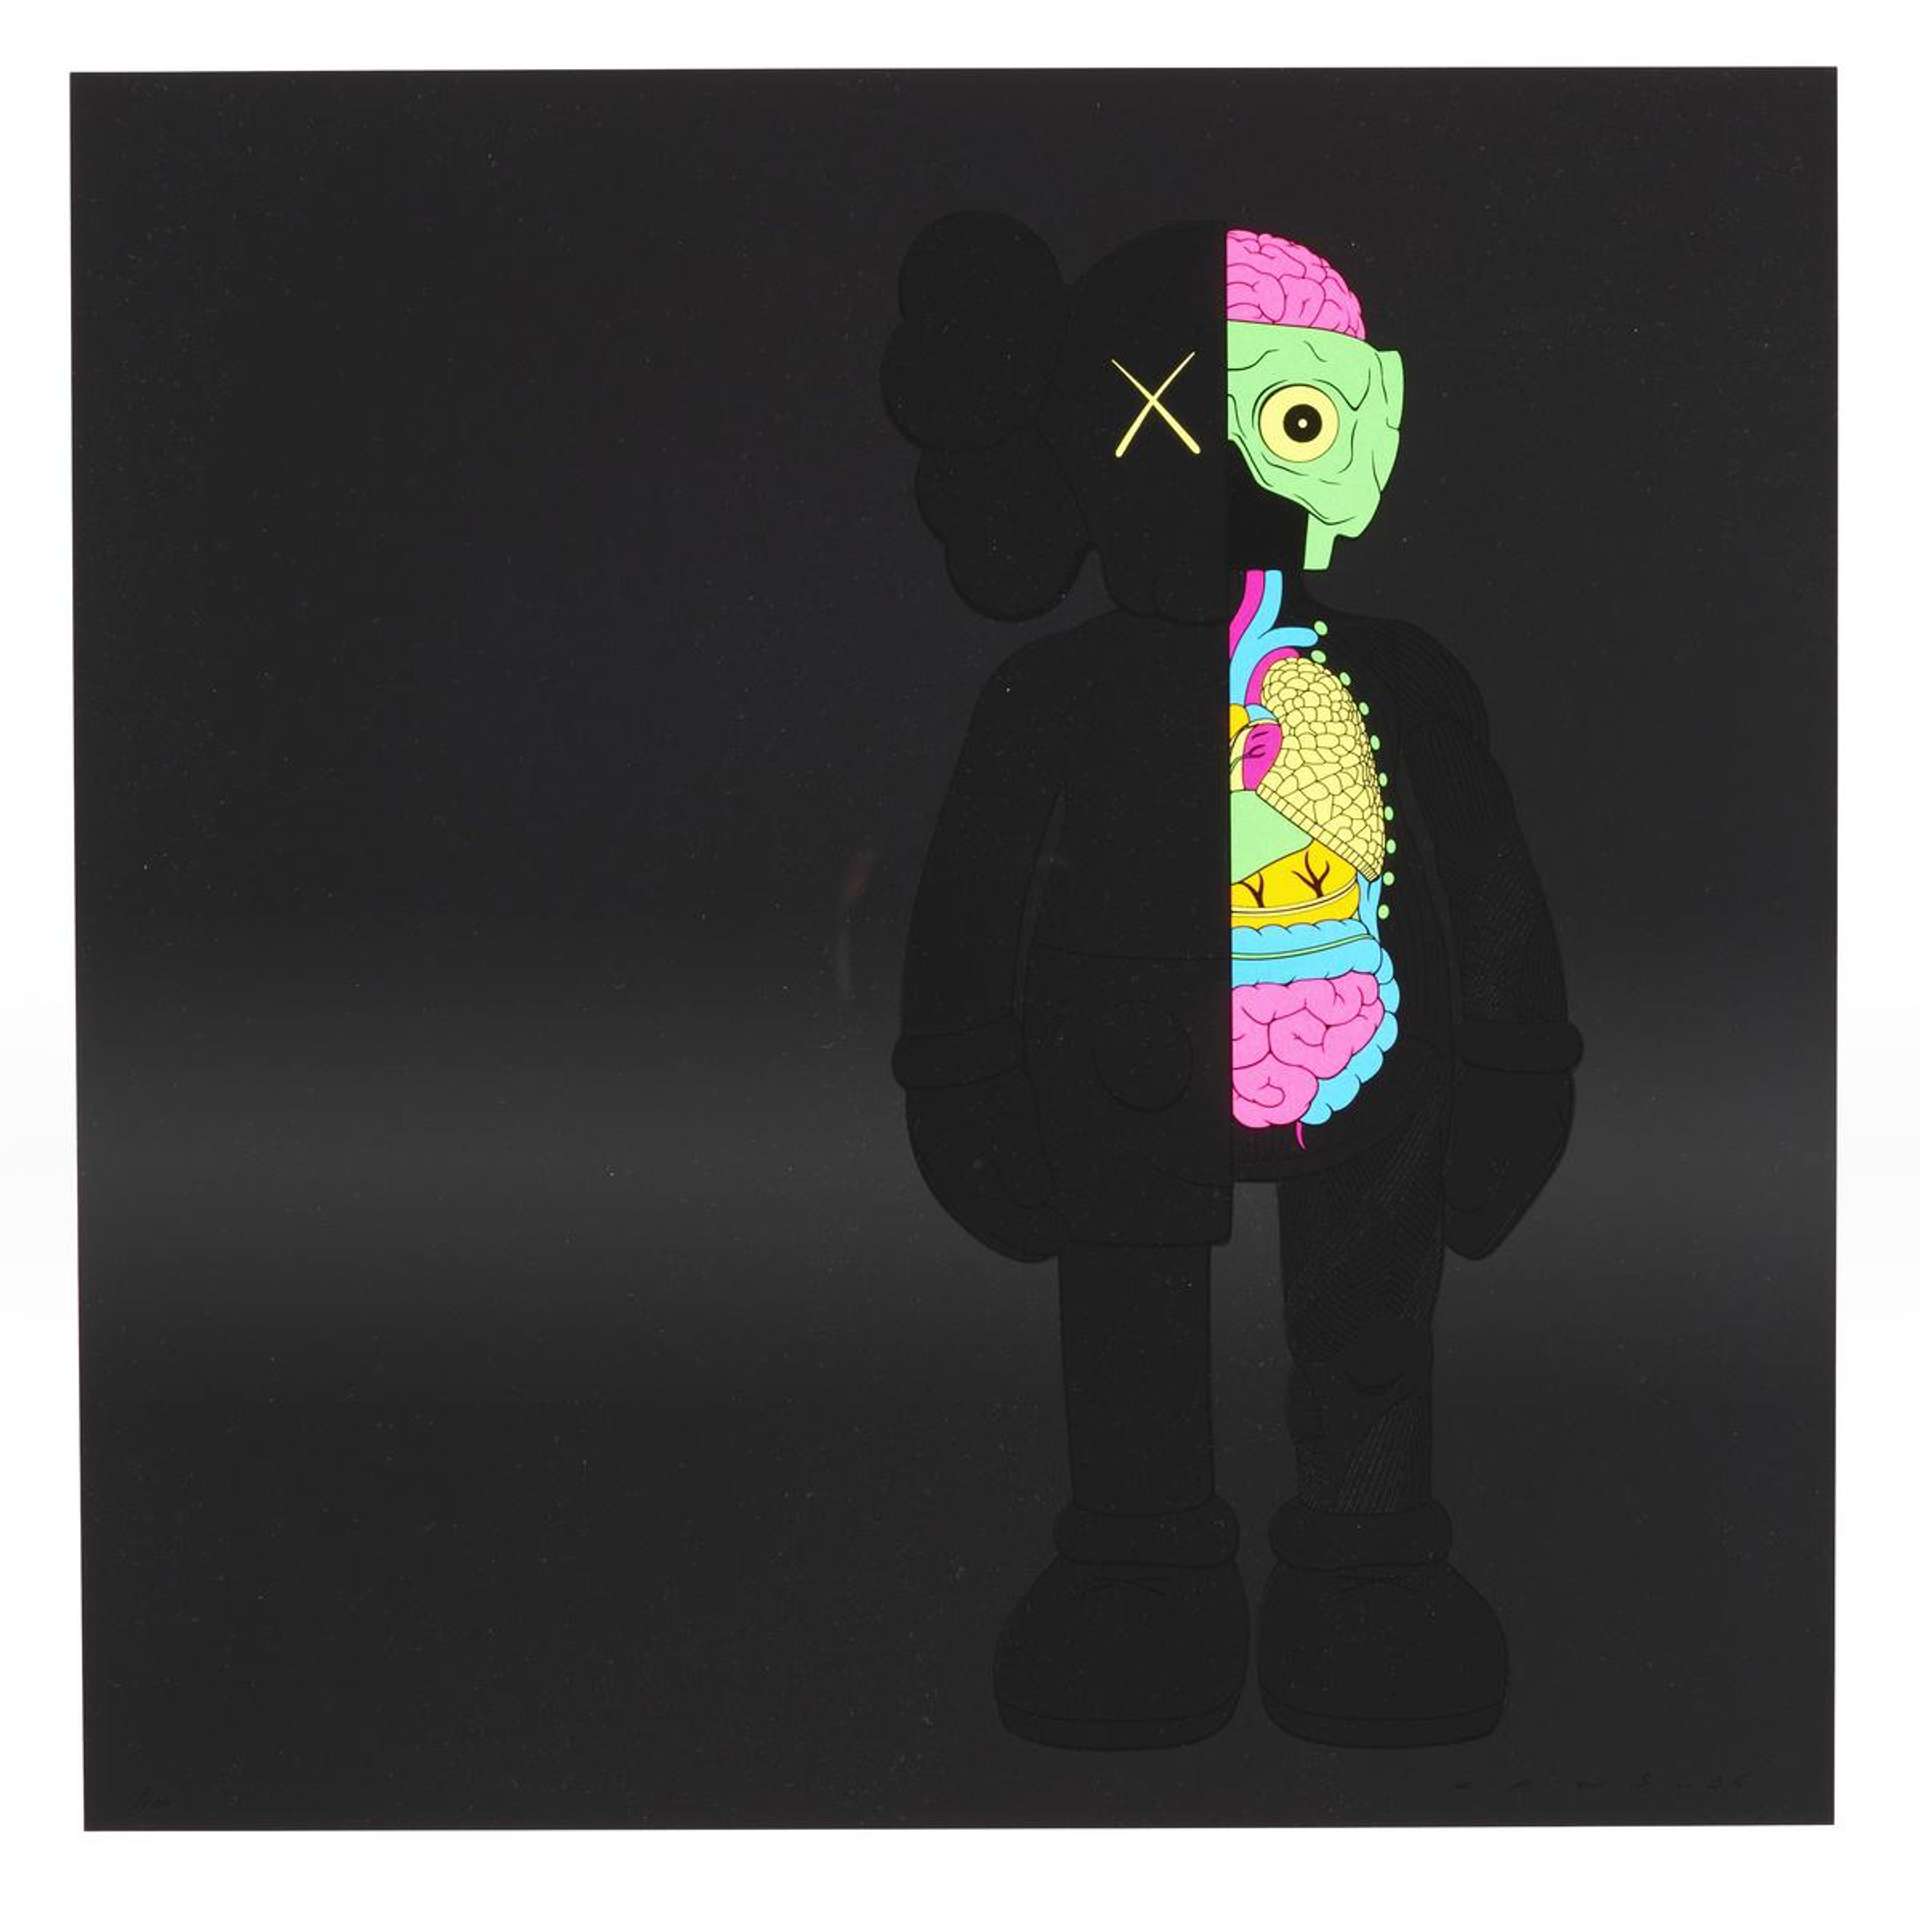 Dissected Companion (Black) by KAWS